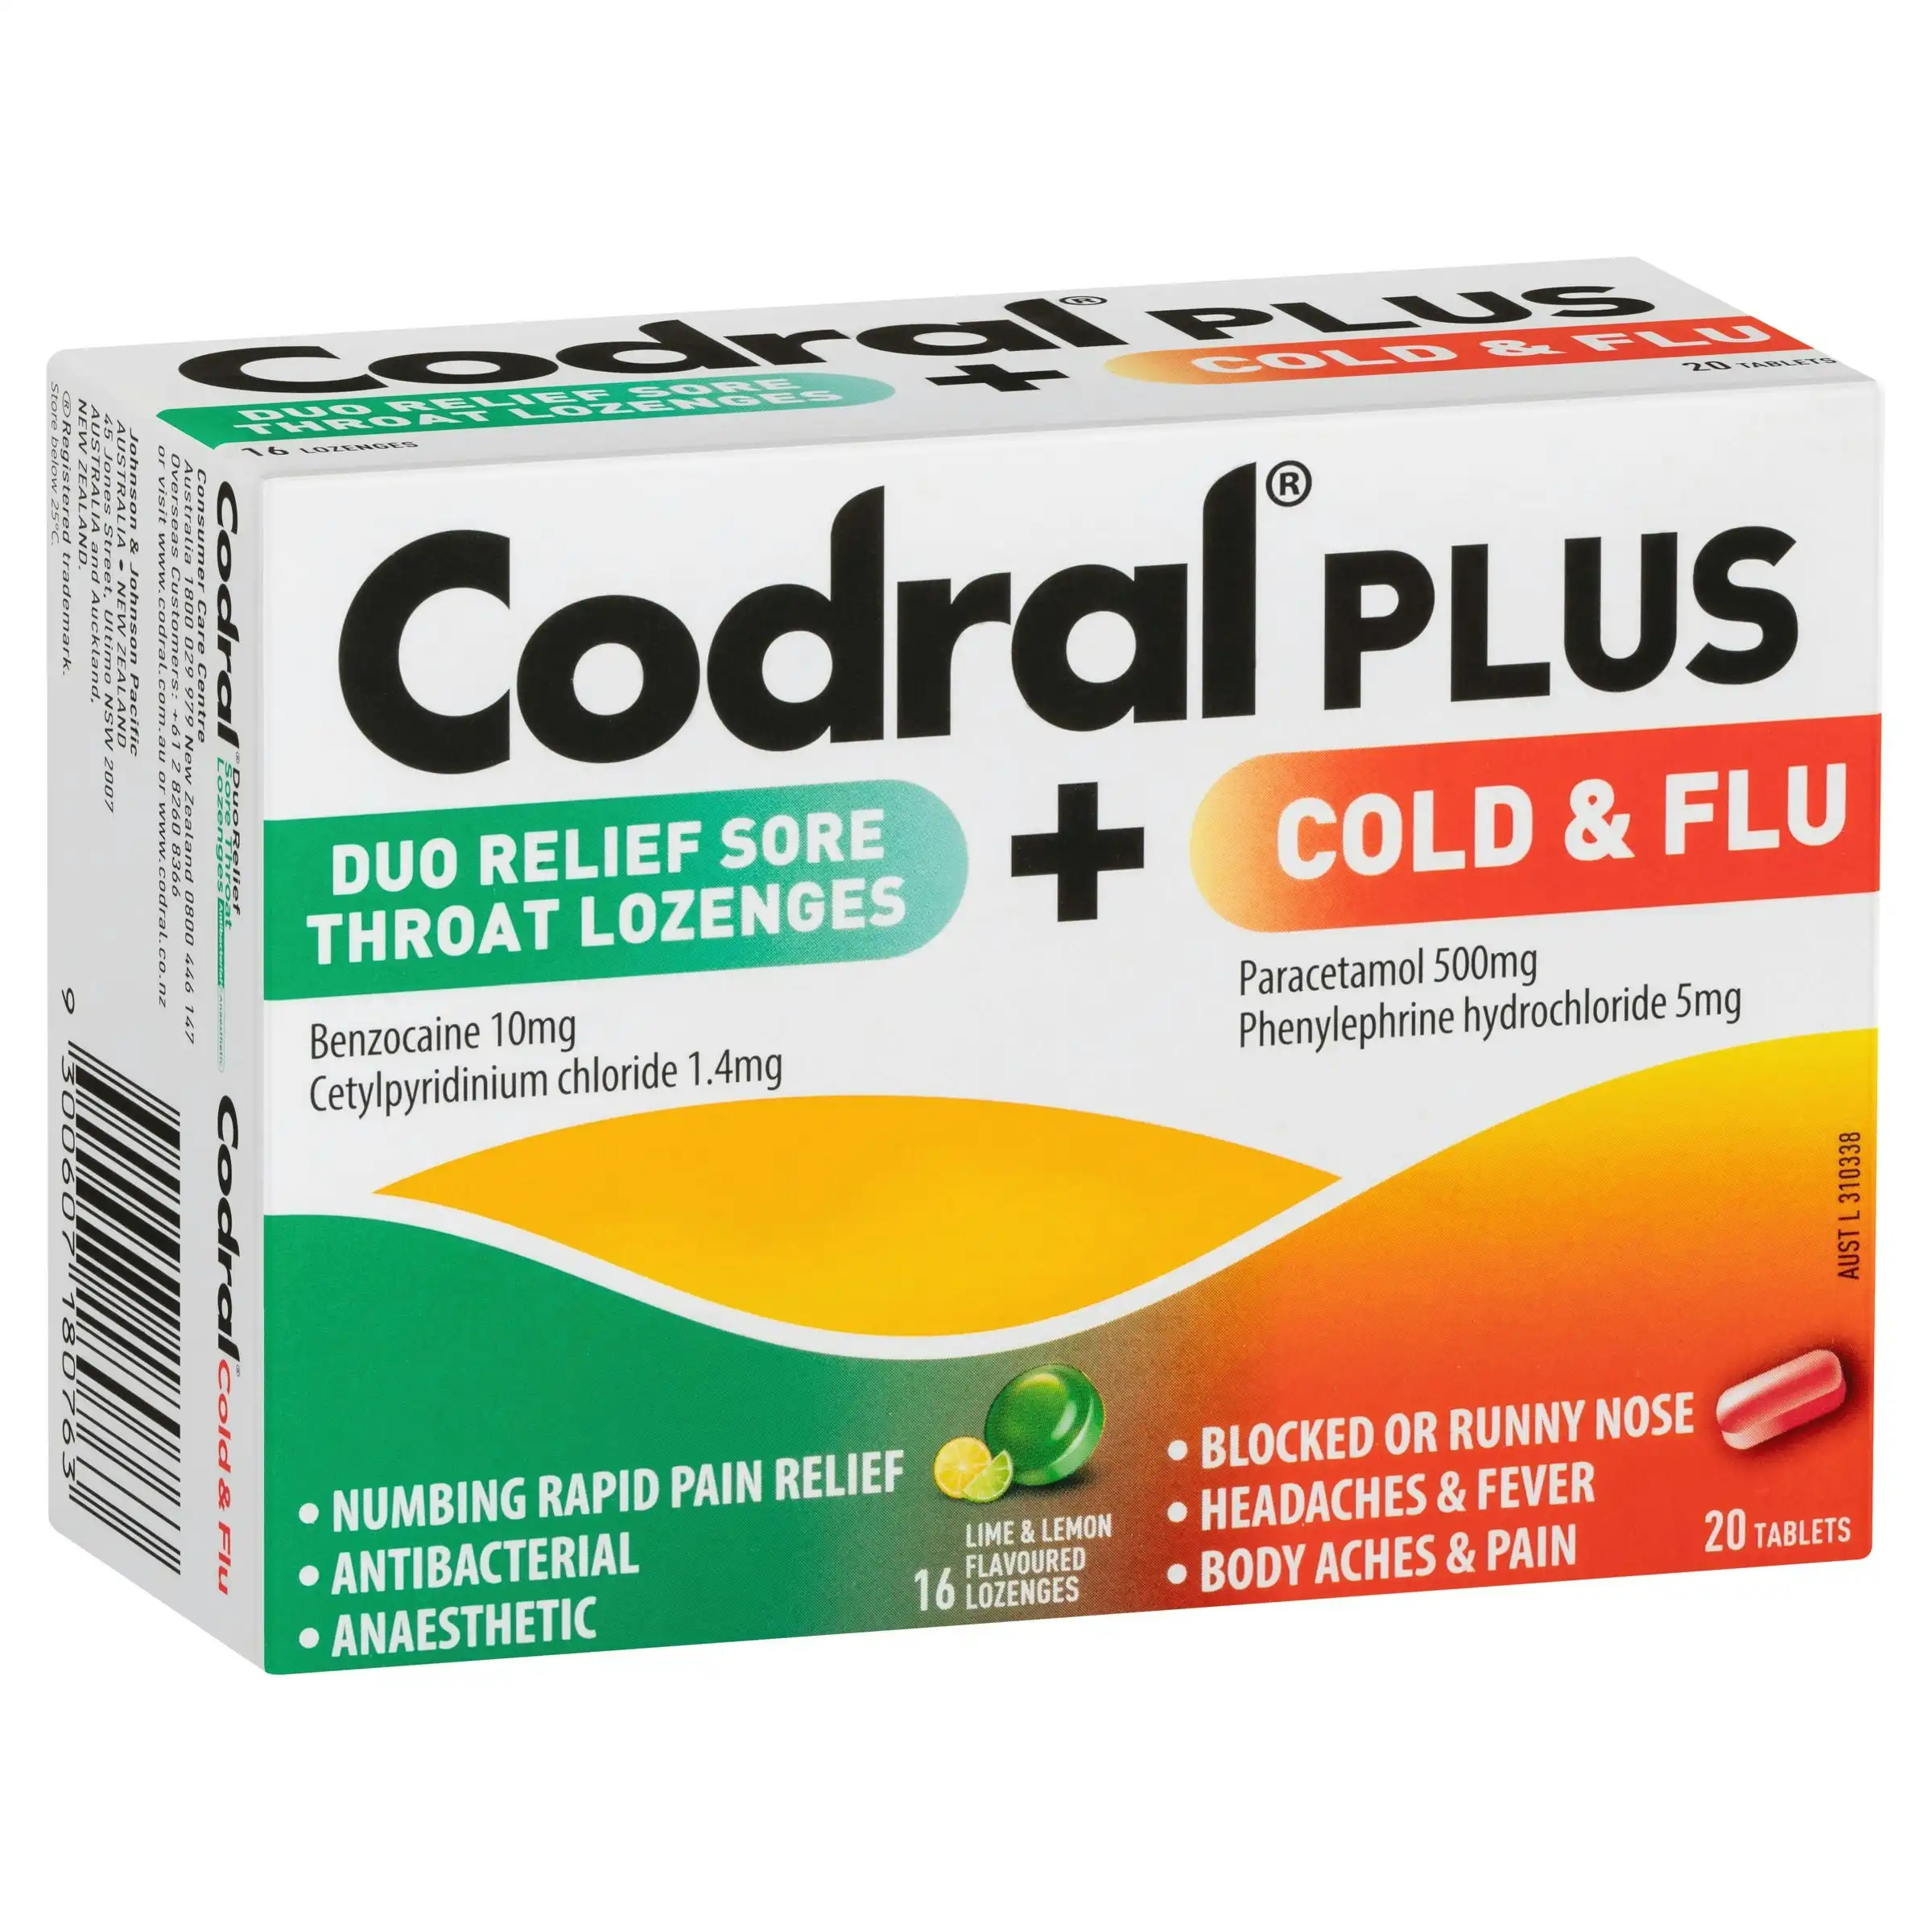 CODRAL Plus Sore Throat 16 Lozenges & Cold and Flu + Decongestant 20 Tablets